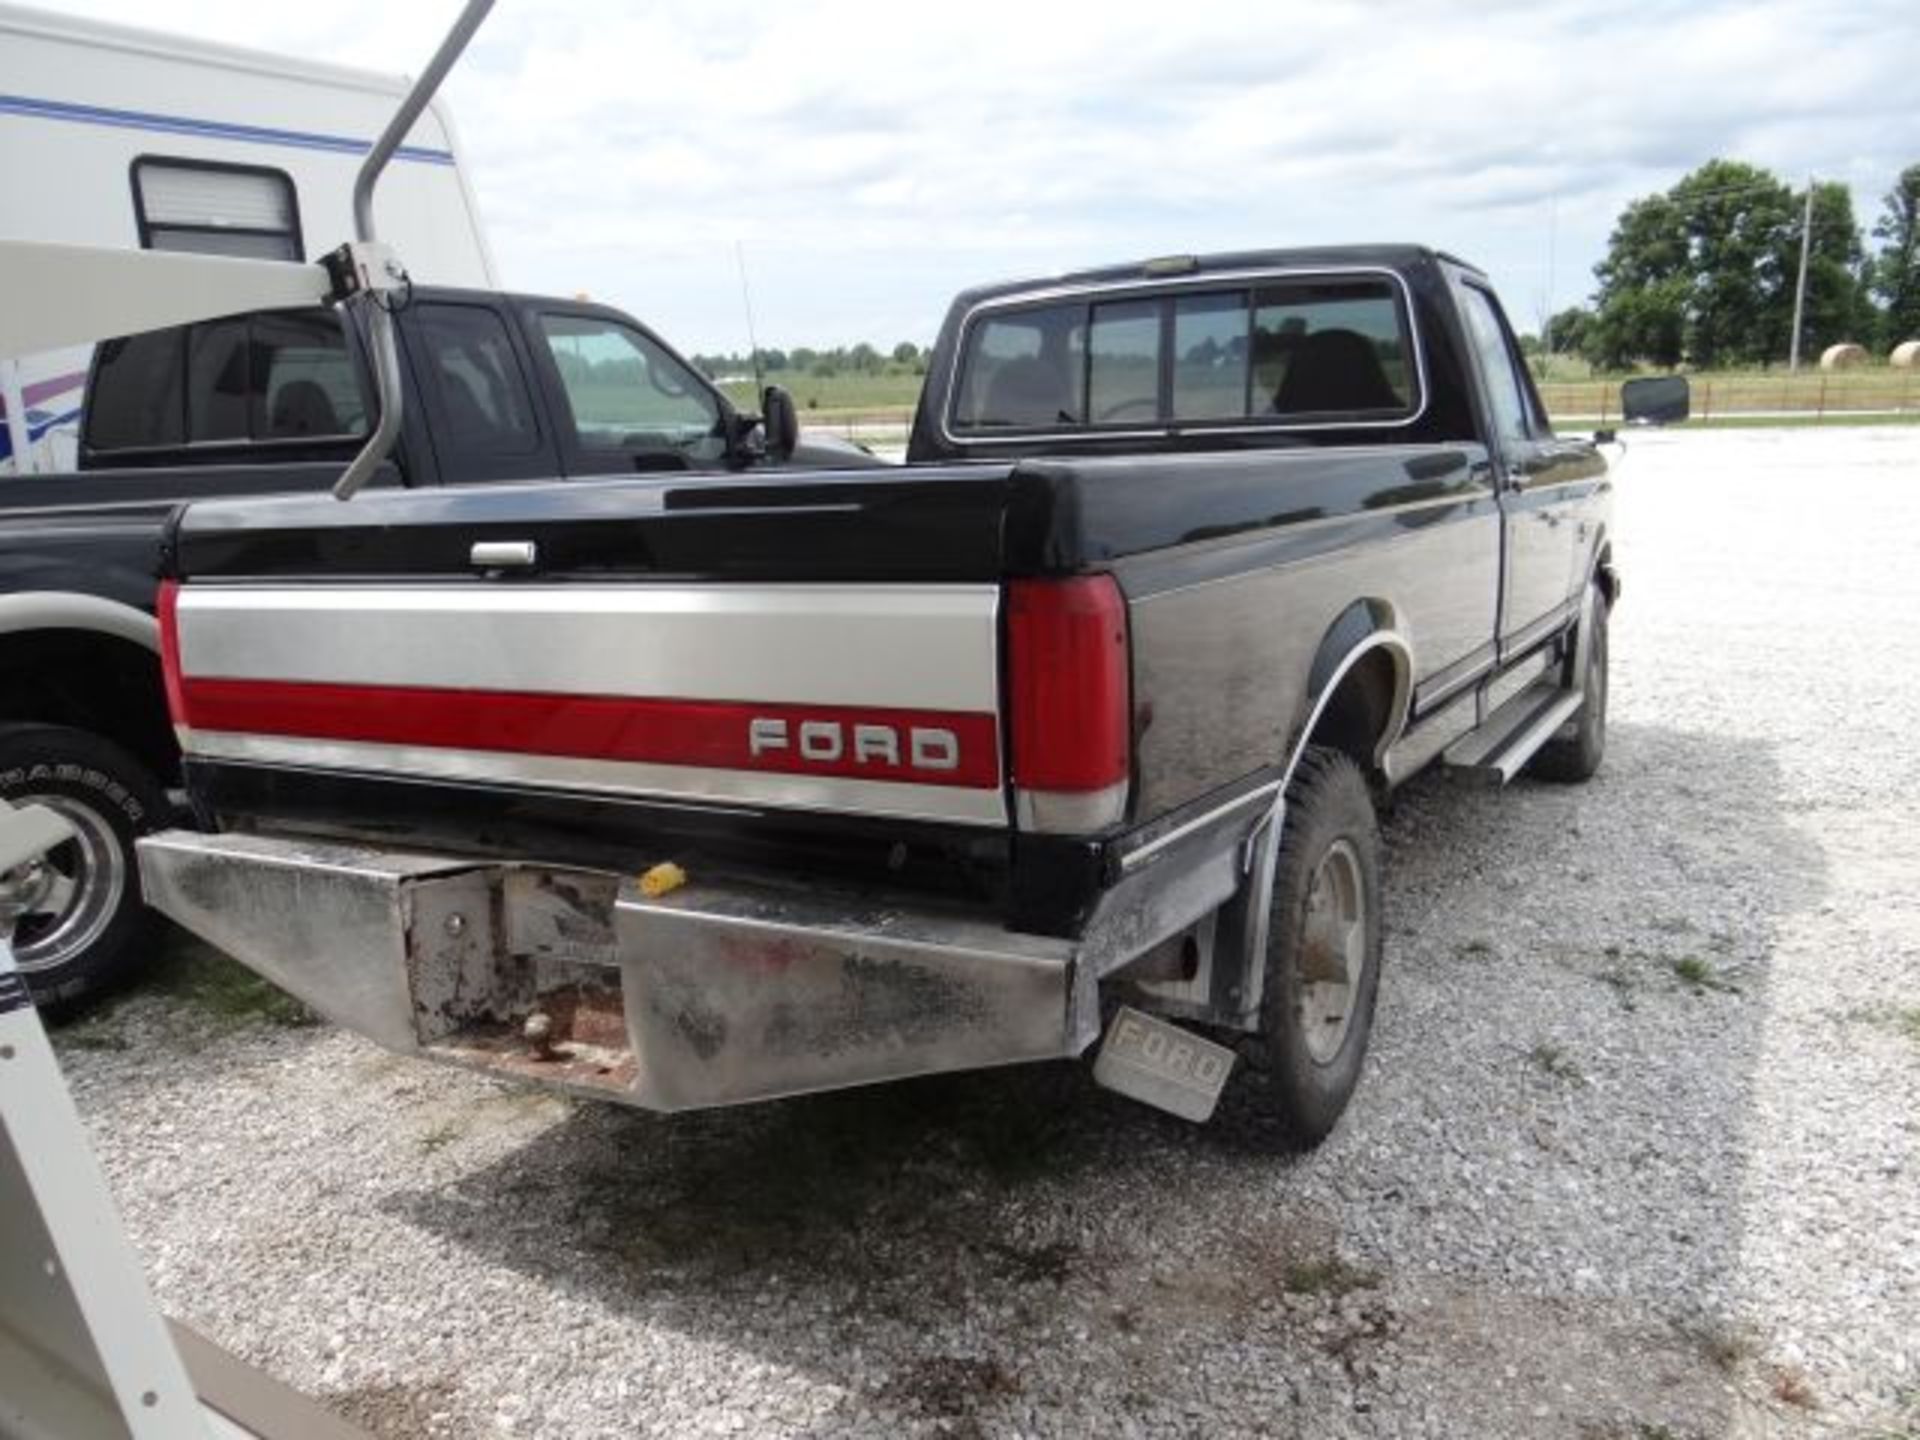 1989 Ford F250 XLT Truck 4wd, Diesel, Power Windows & Locks, Title in the Office, vin#886441 - Image 3 of 3